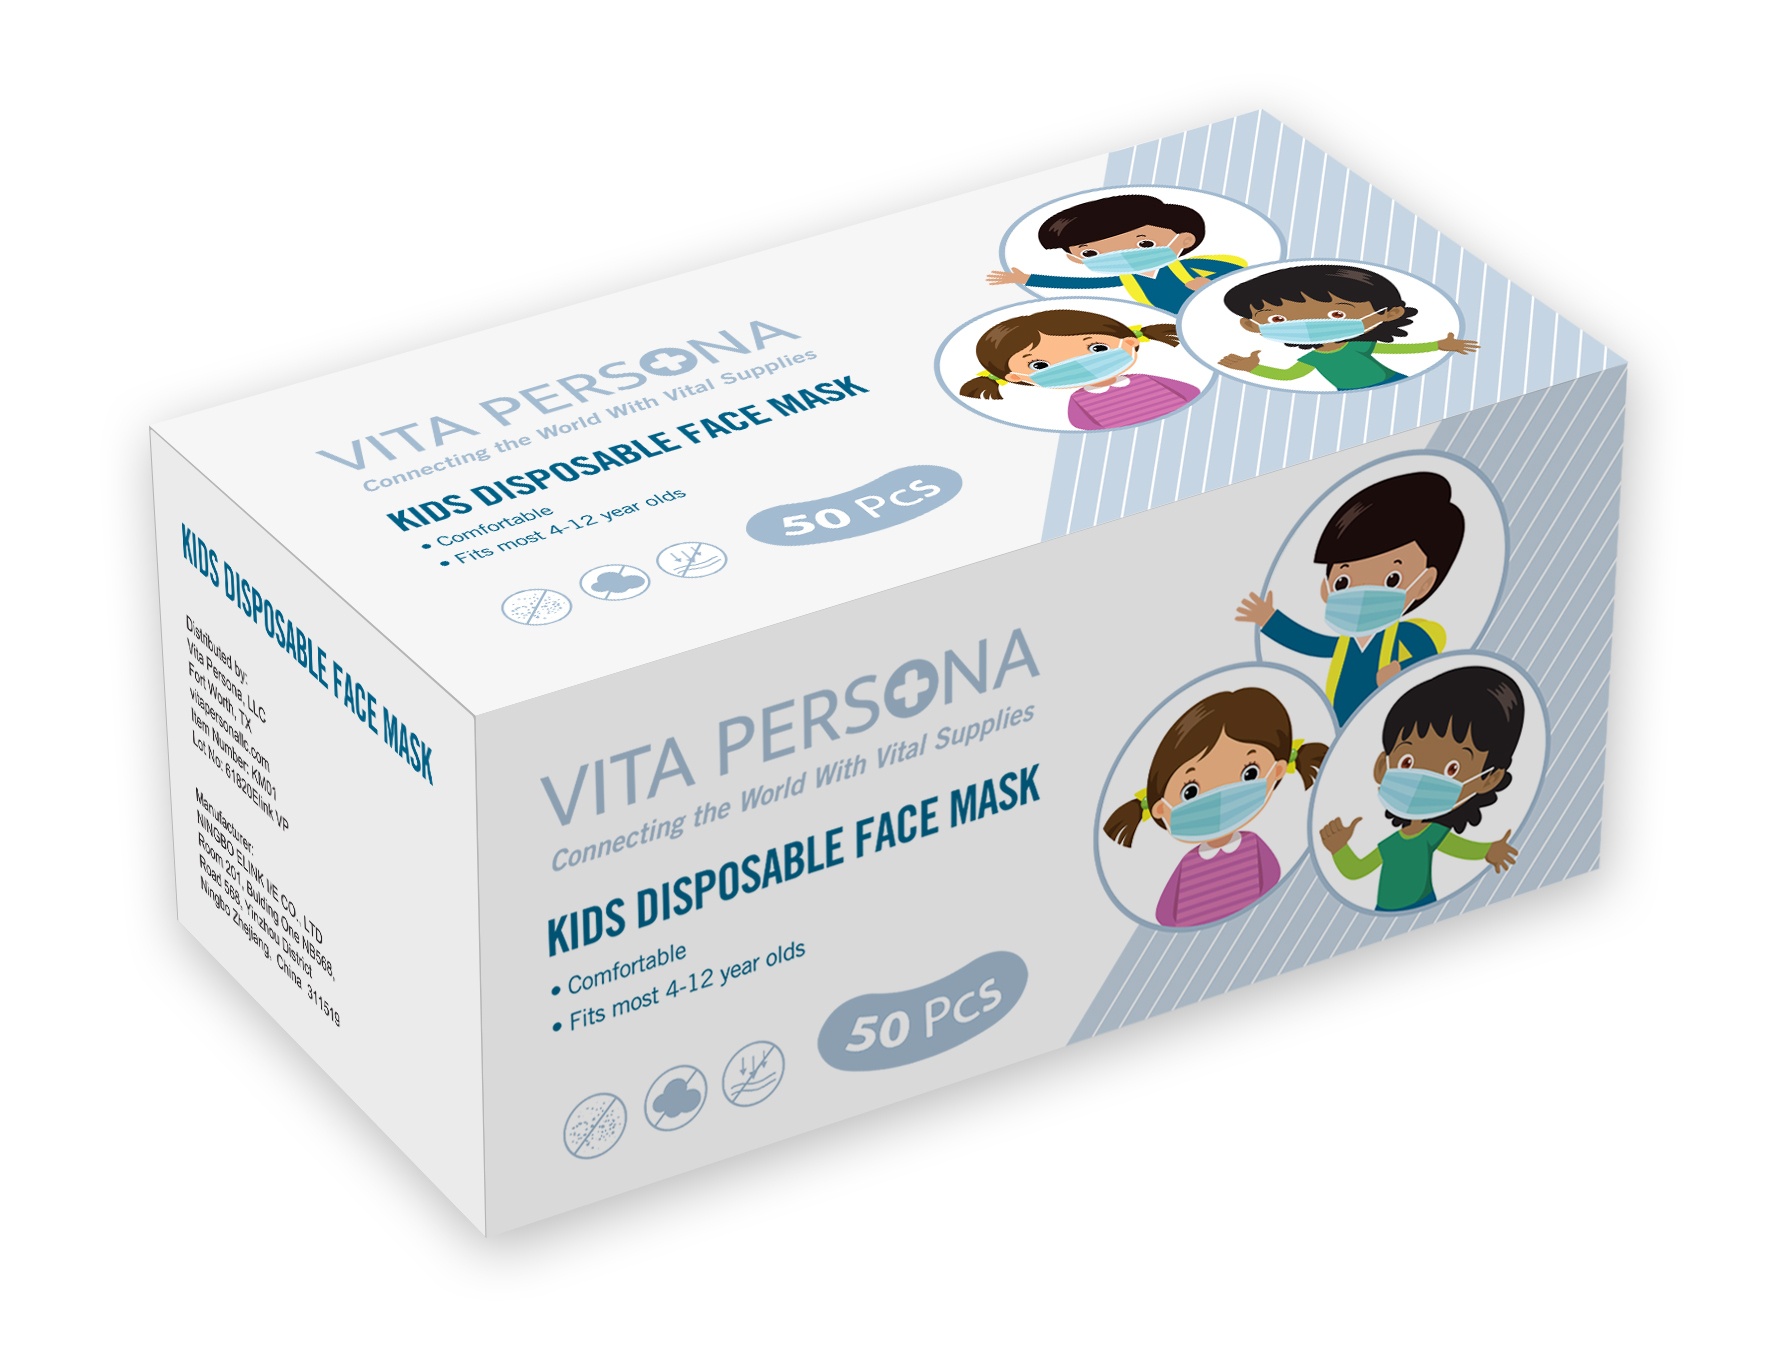 Download Youth Deluxe 3ply Mask Box of 50 ($0.29/pc) - Vita Persona, LLC